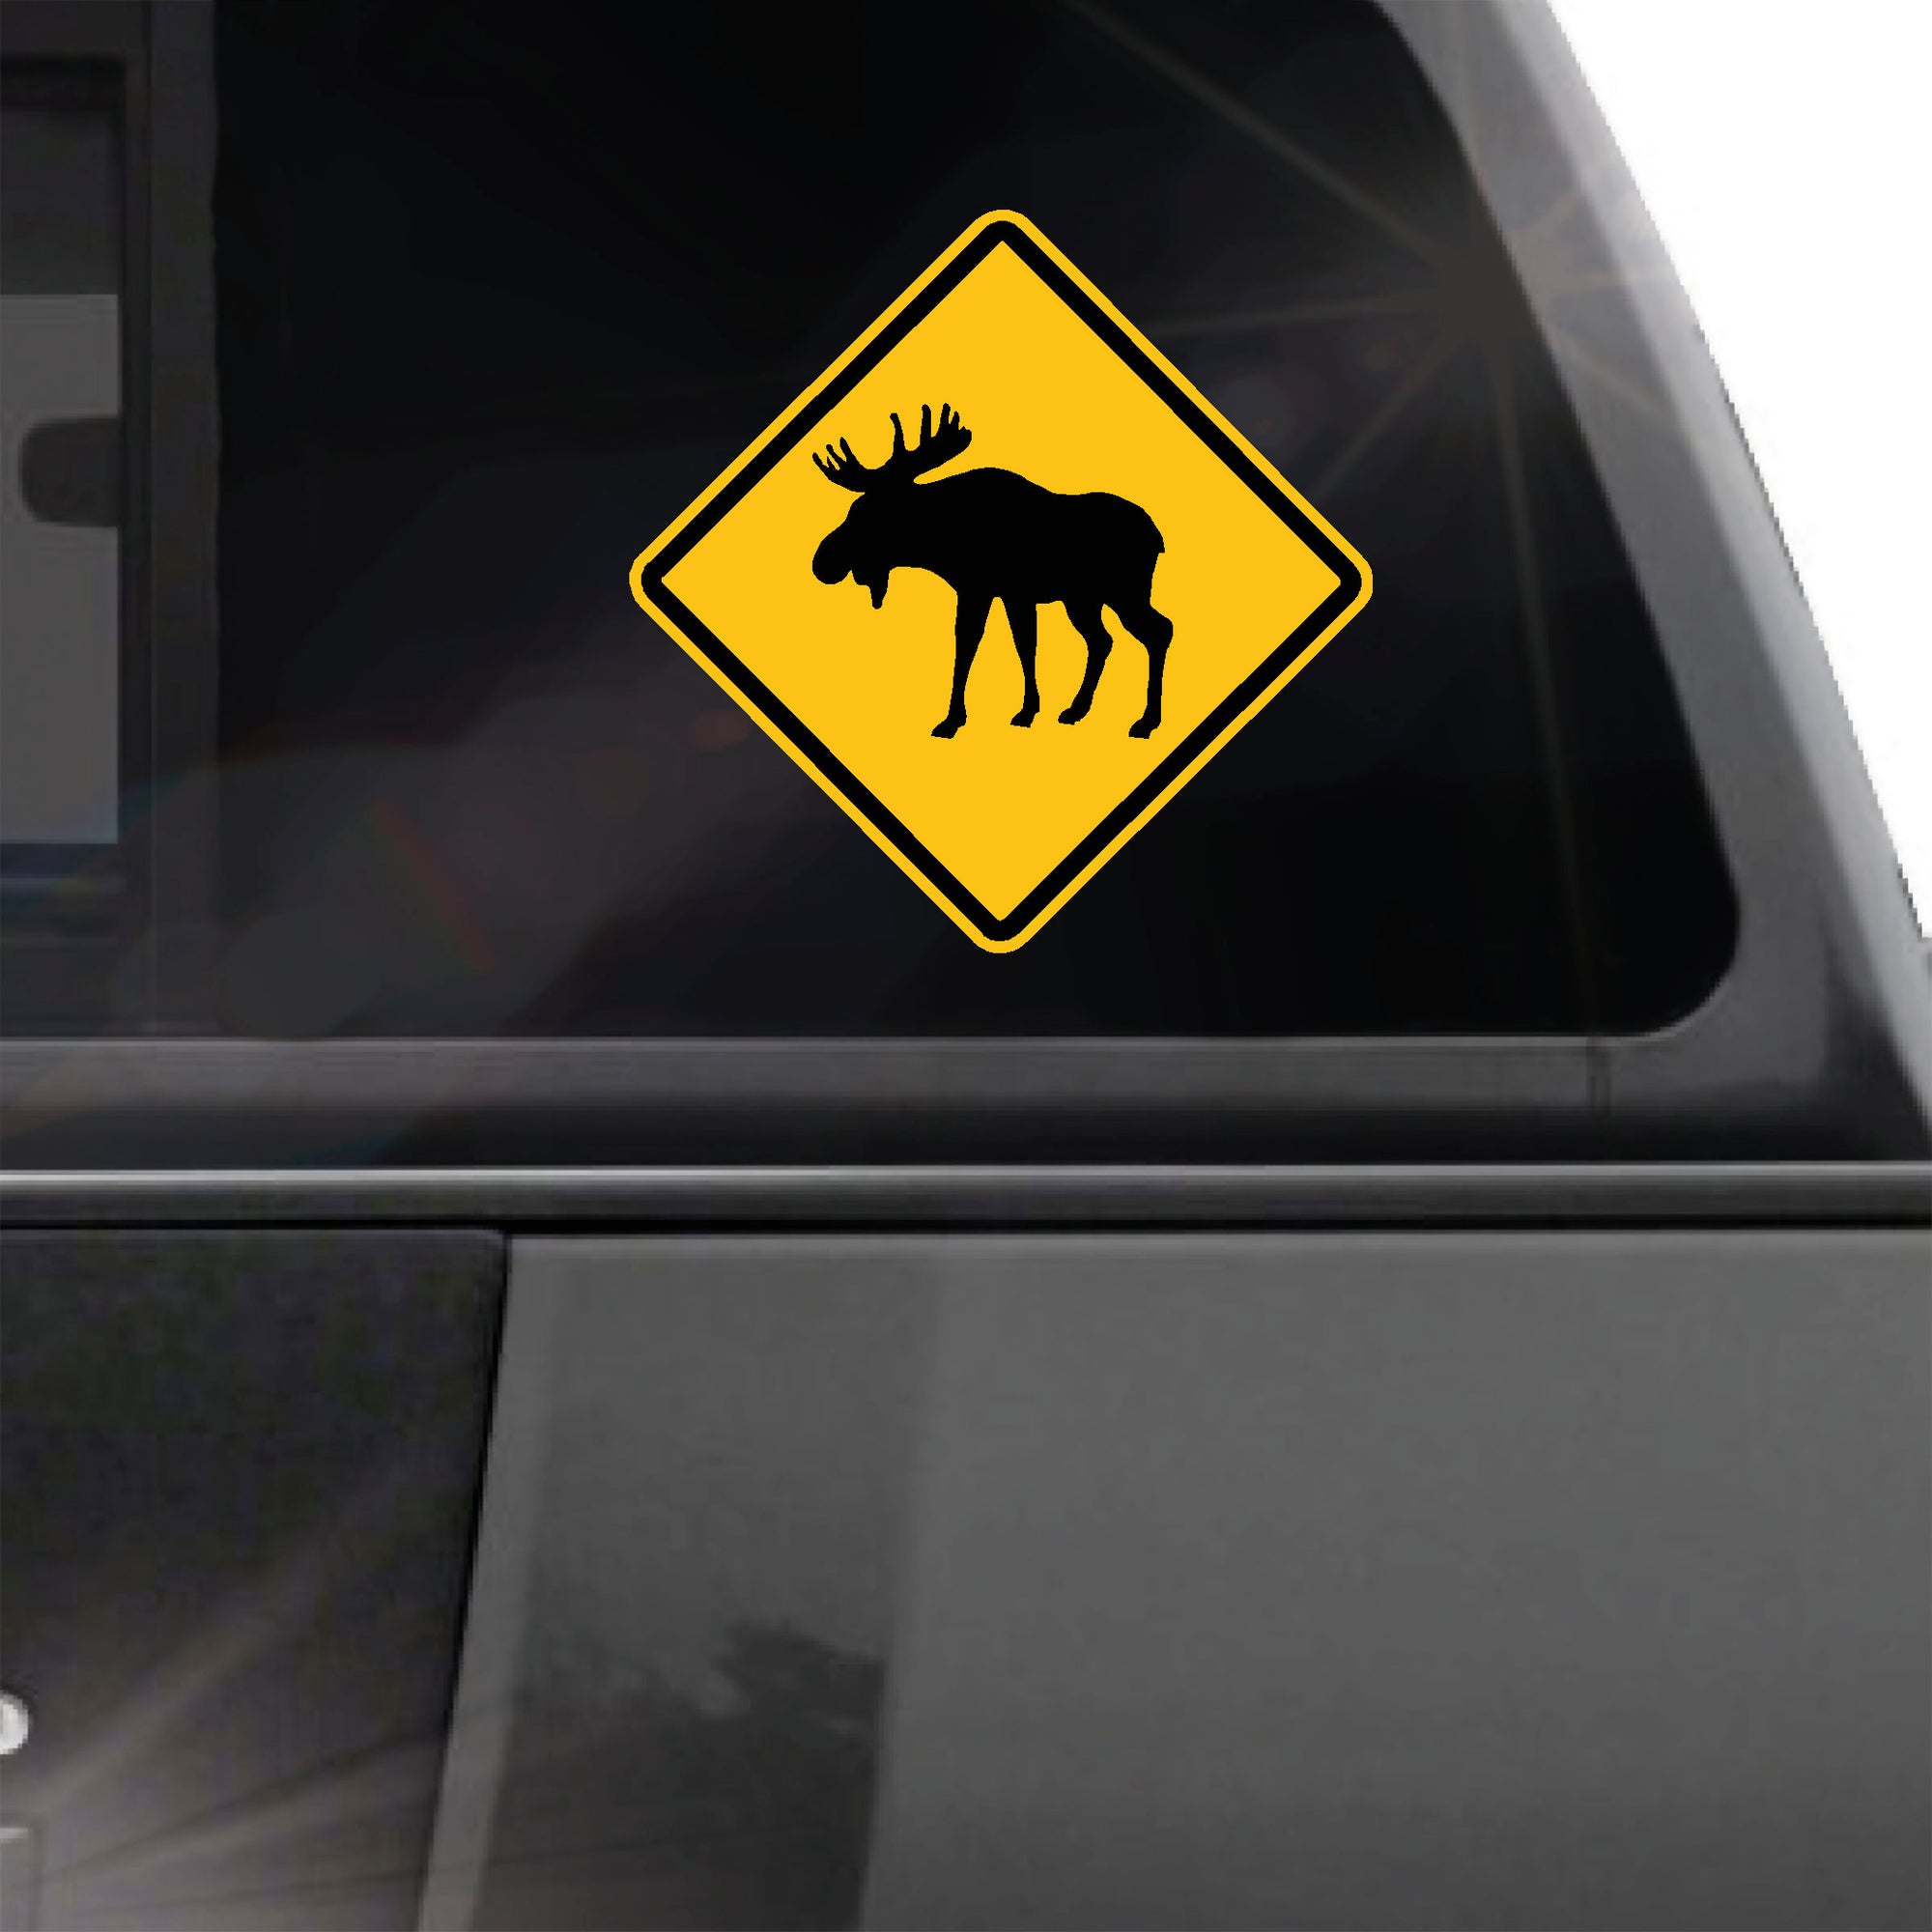 Moose Crossing caution road sign sticker